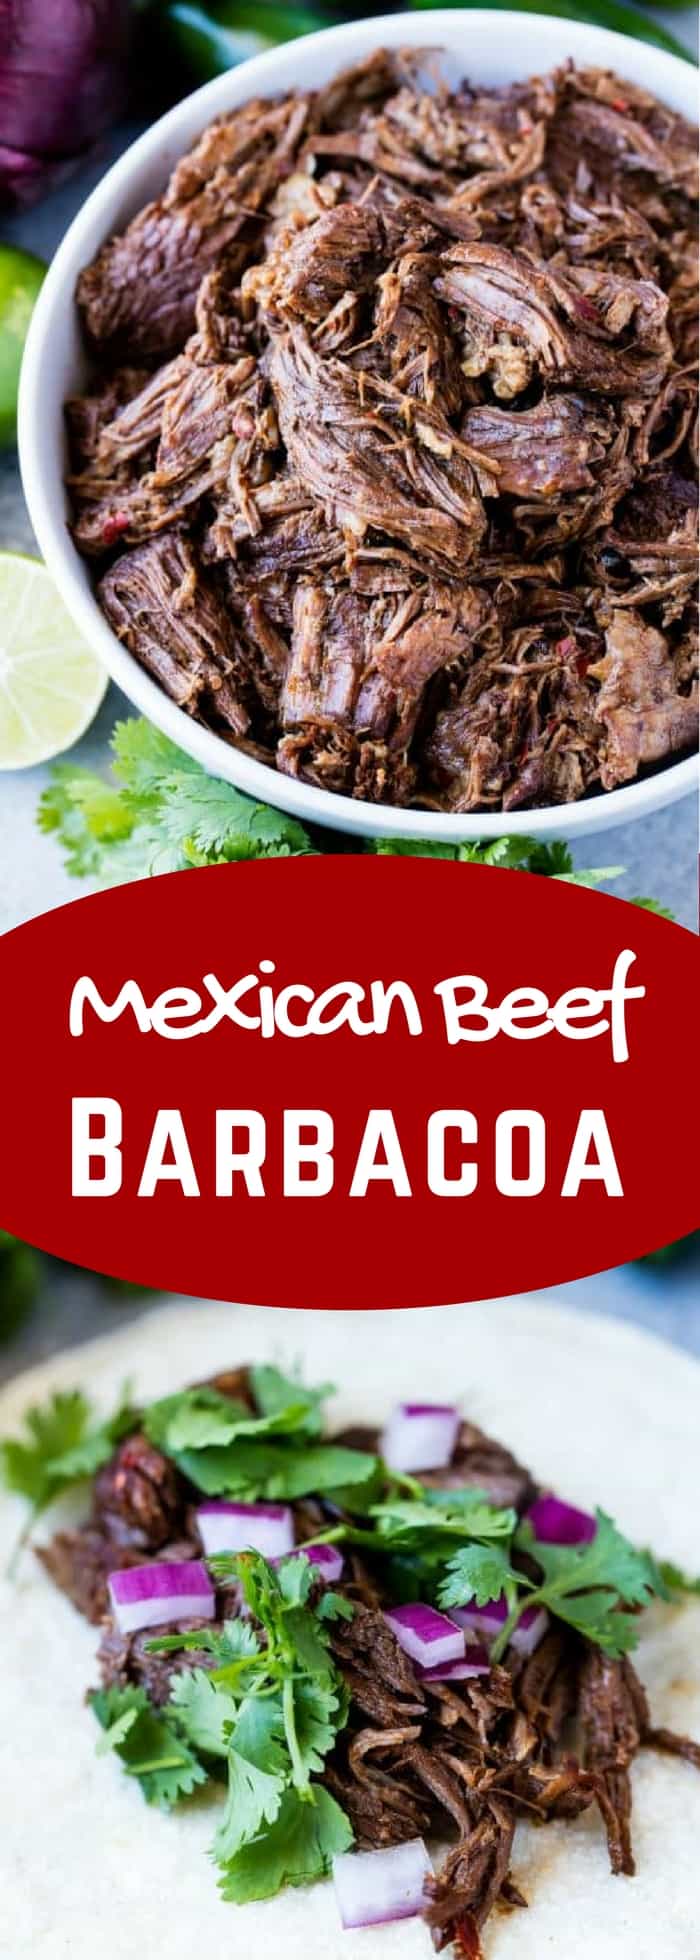 This easy recipe for Mexican Beef Barbacoa is full of authentic flavor and can be easily made in the oven, slow cooker, or an Instant Pot!